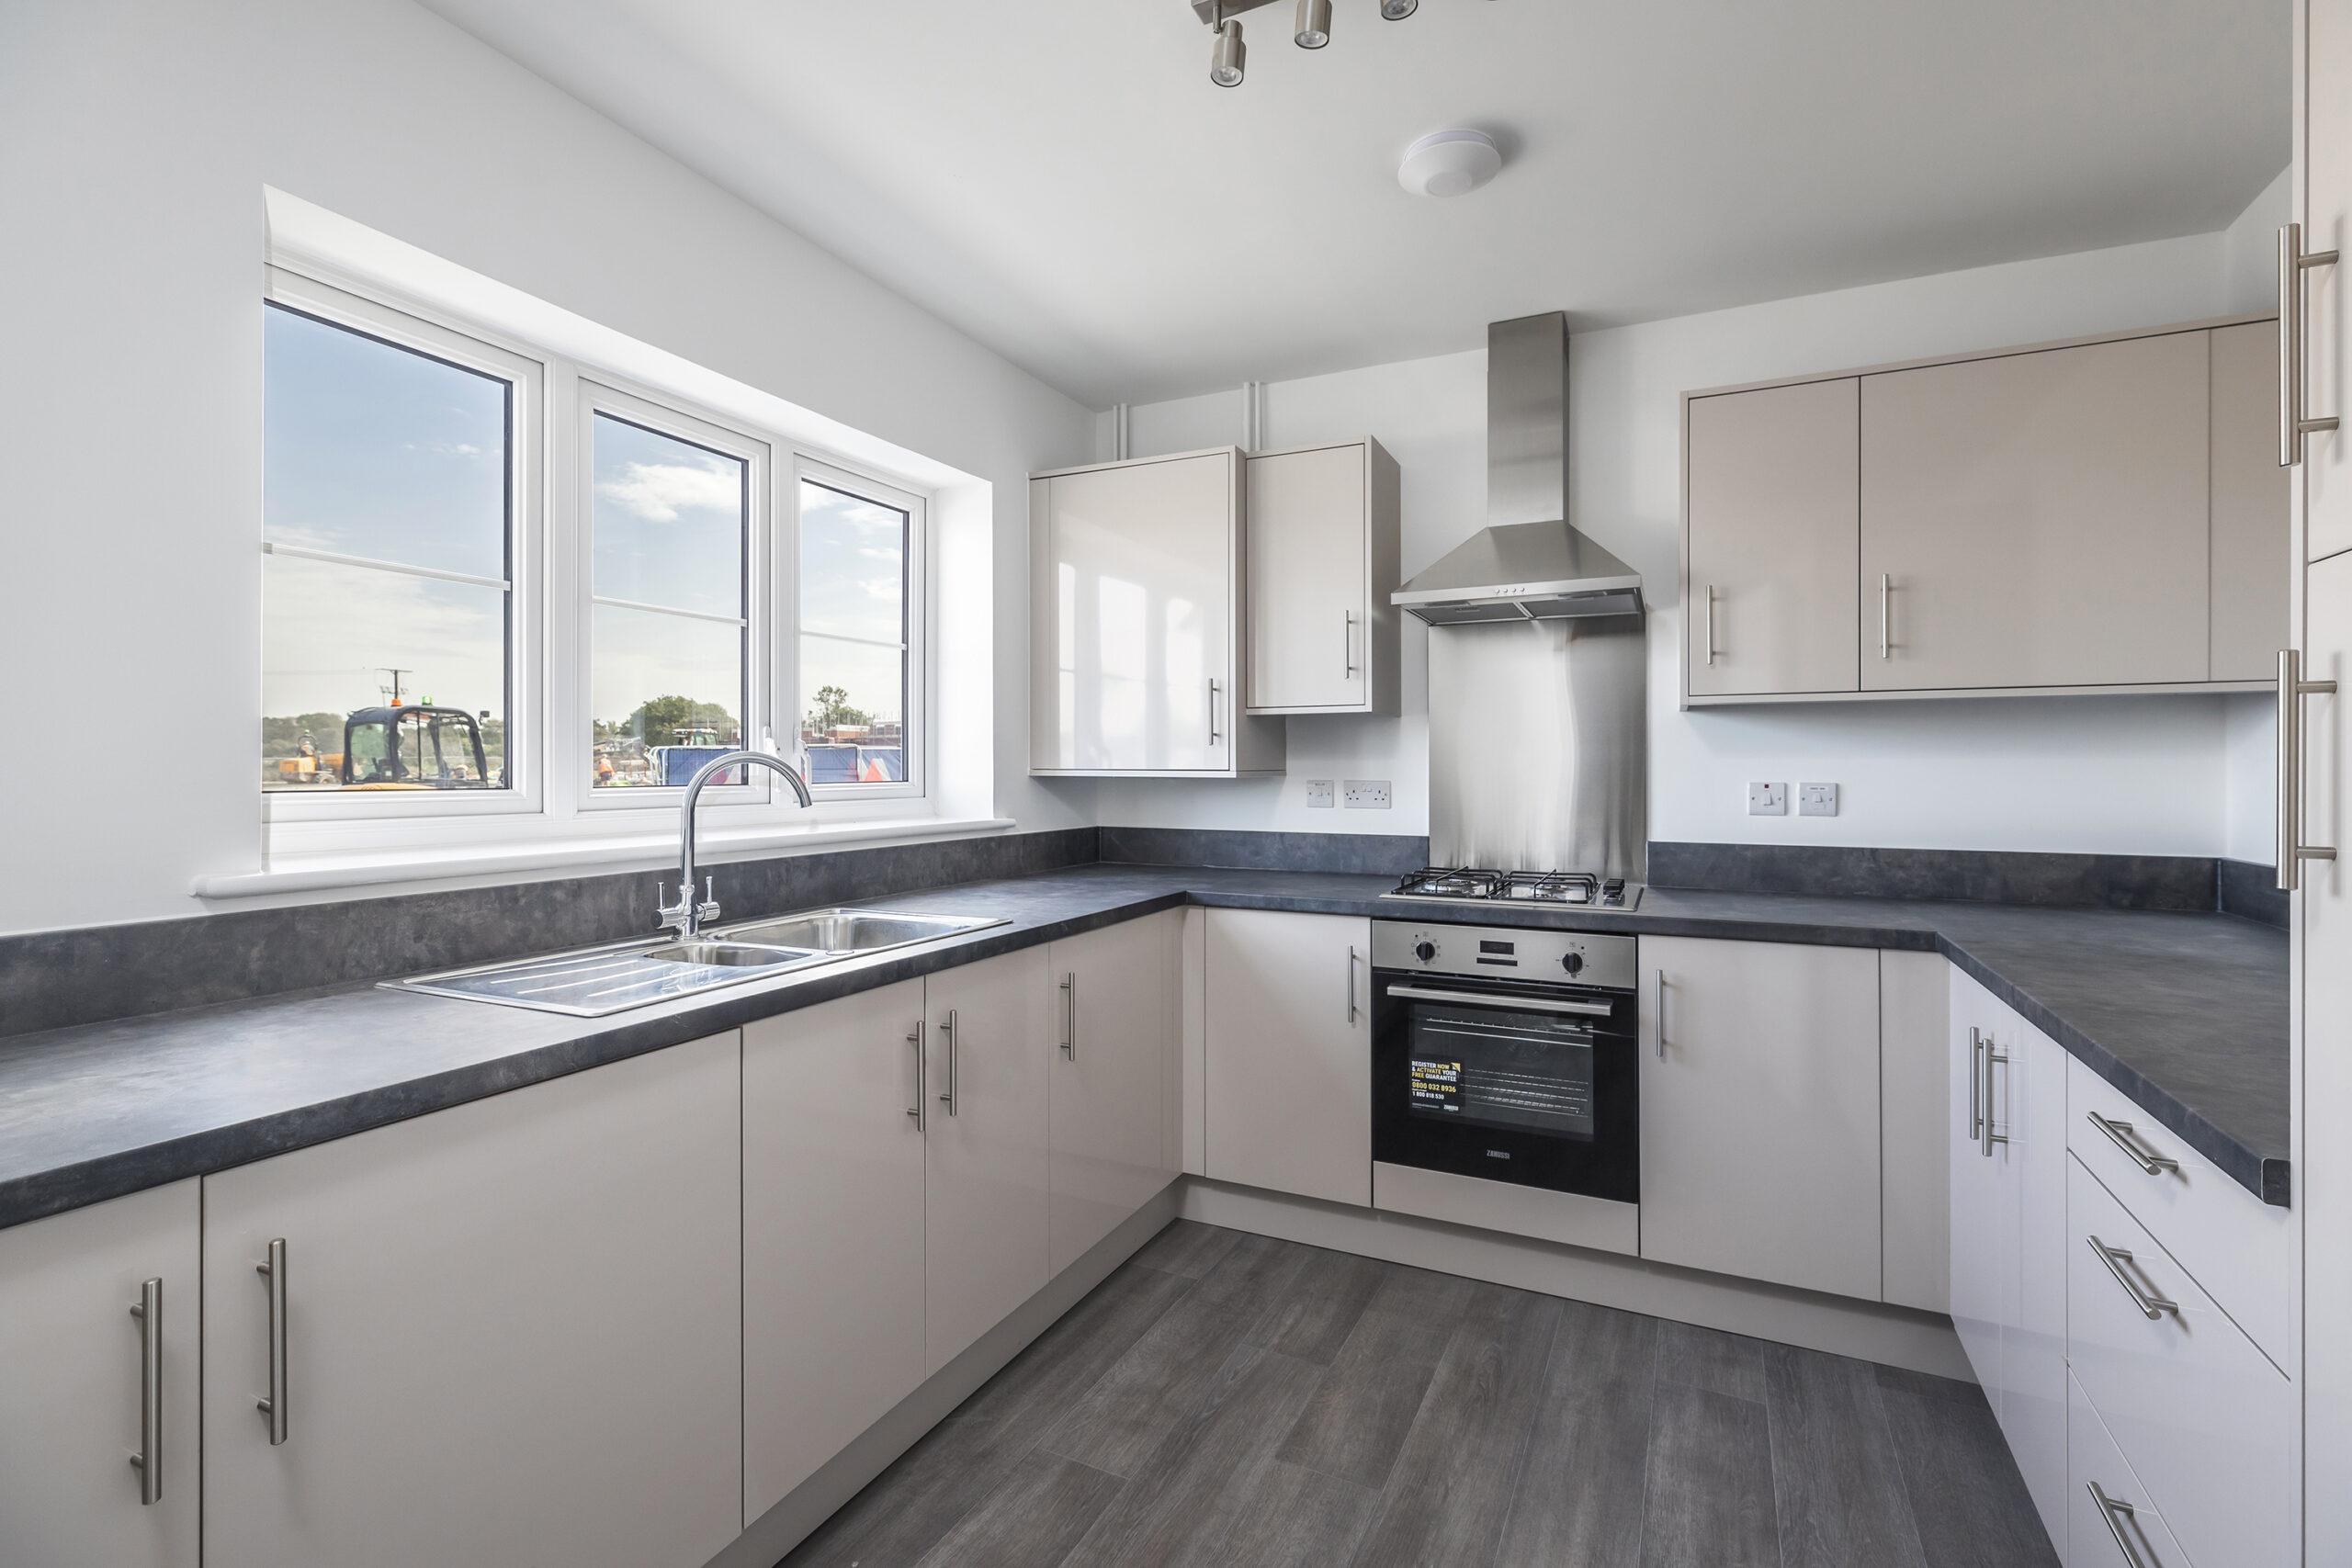 Image of a kitchen from White House Park development from Places for People - available to purchase through Shared Ownership on Share to Buy!